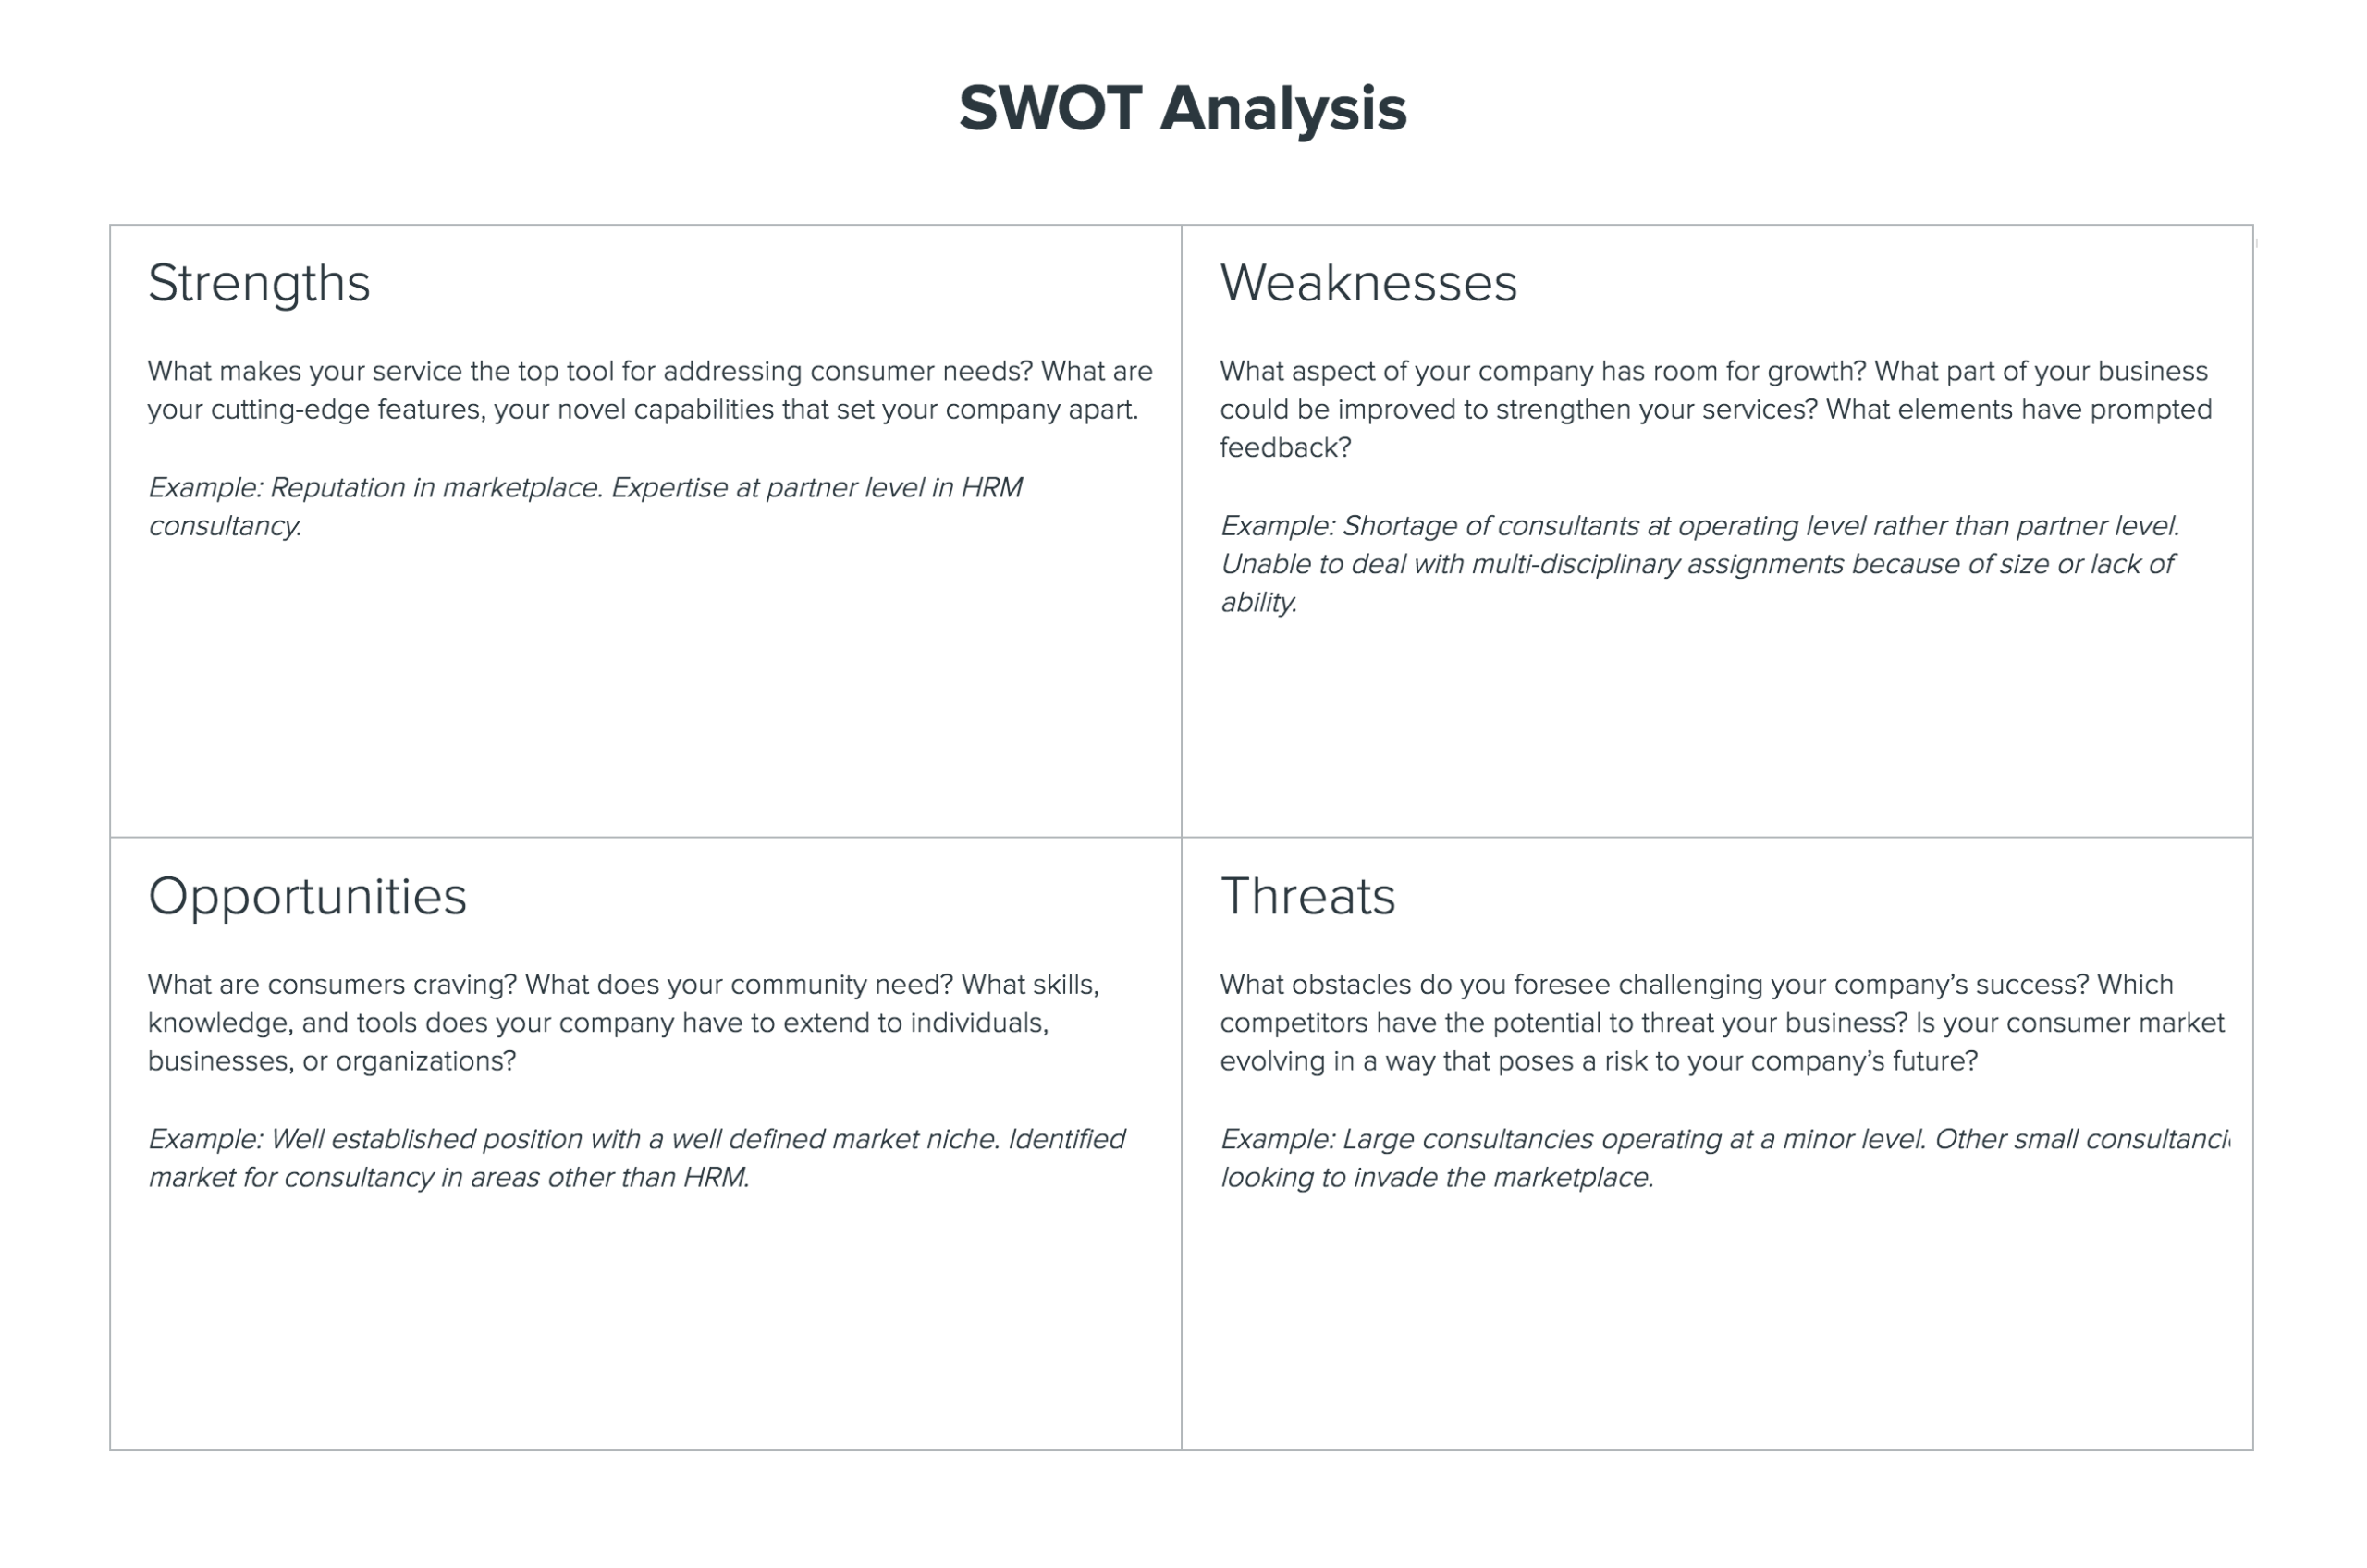 SWOT for Brand Positioning Canvas